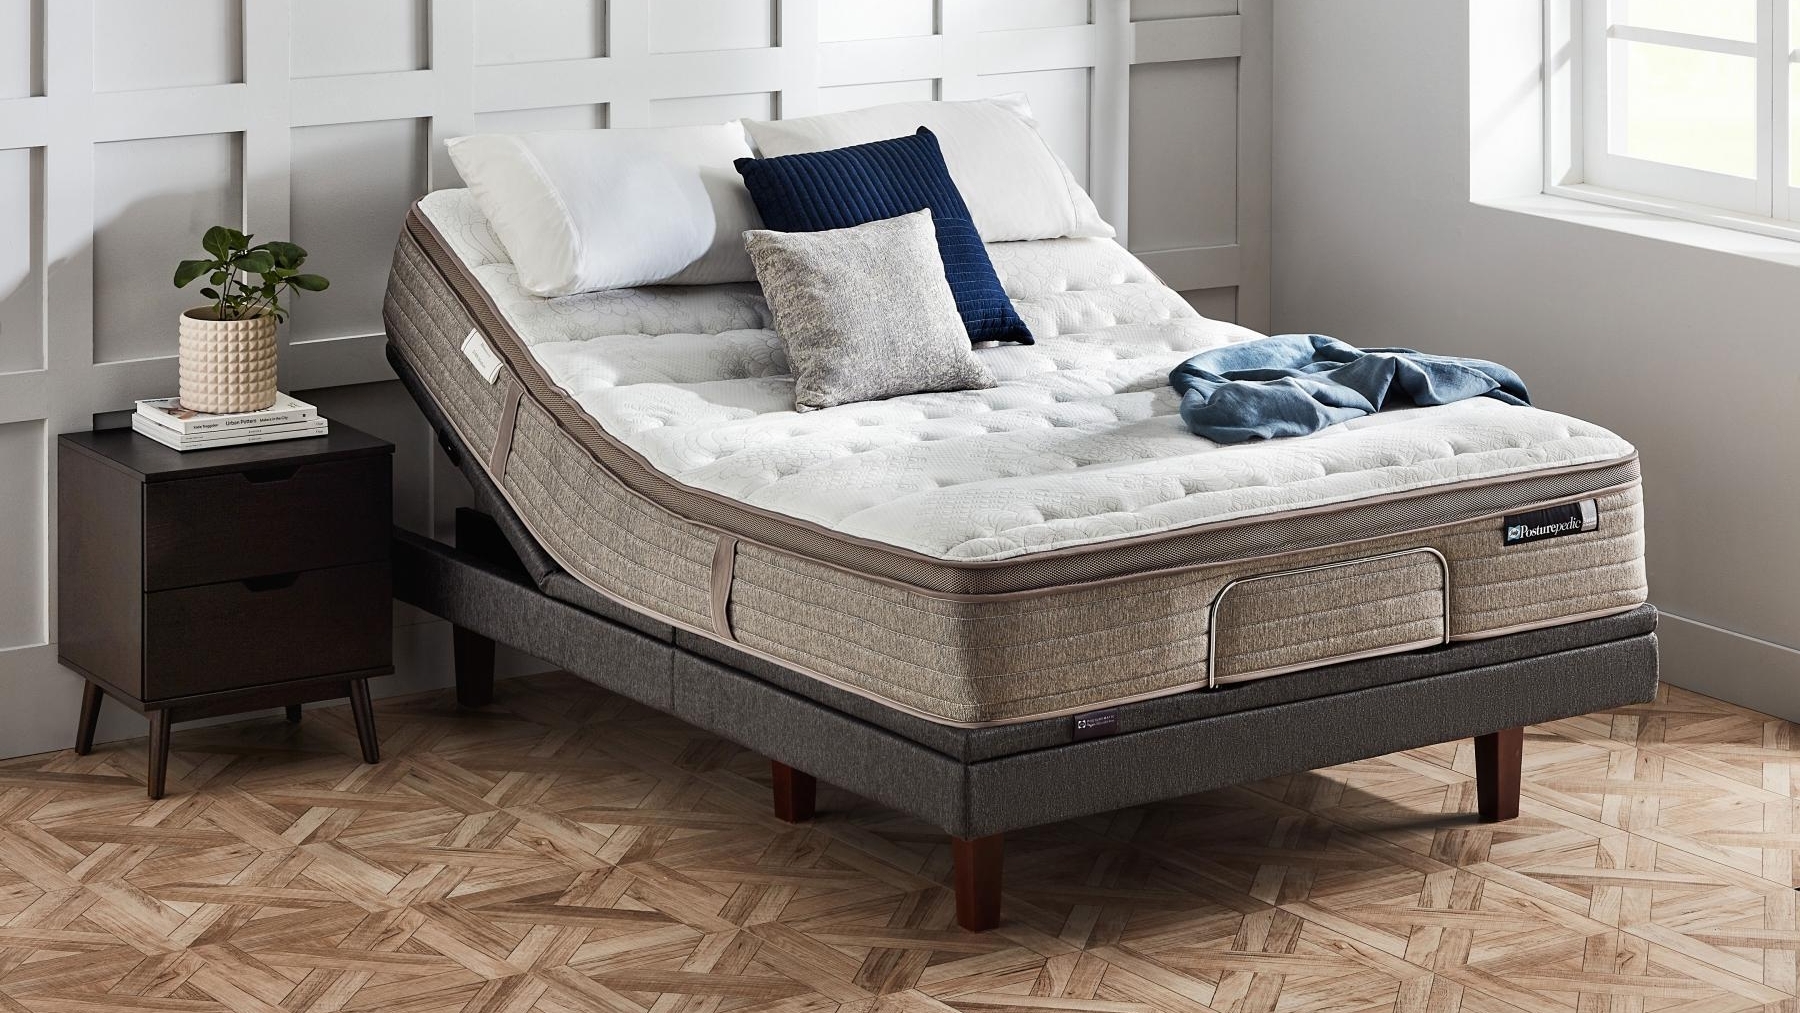 Sealy Posturematic Energise, Sealy Adjustable Bed Frame